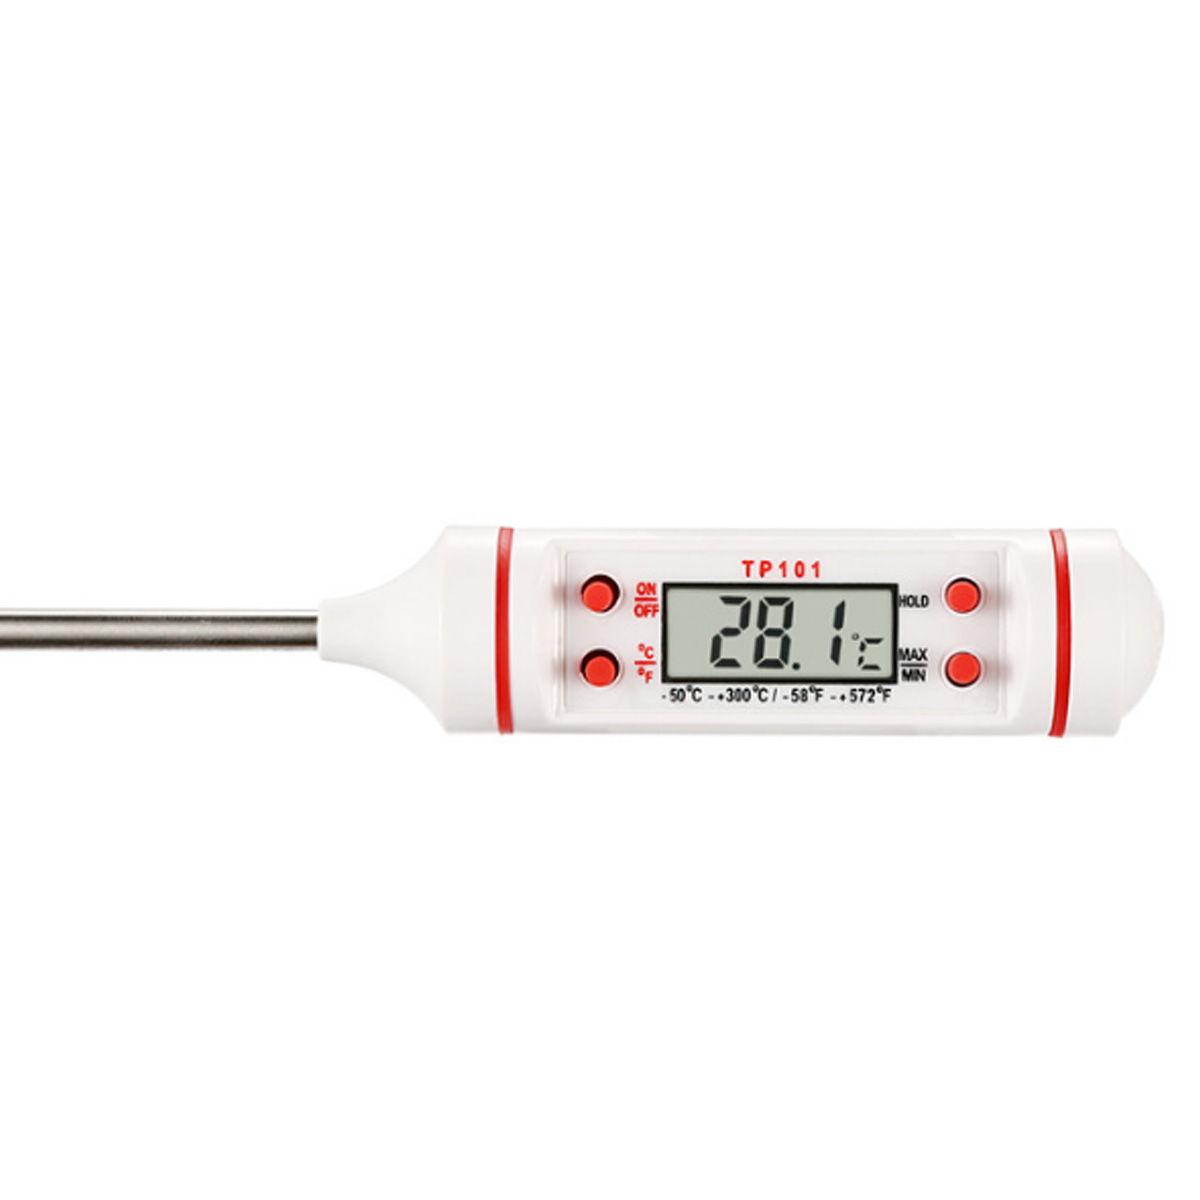 

Food Baking Digital Kitchen Thermometer Electronic Probe Type Liquid Barbecue BBQ Bottle Thermometer Pen Thermometer